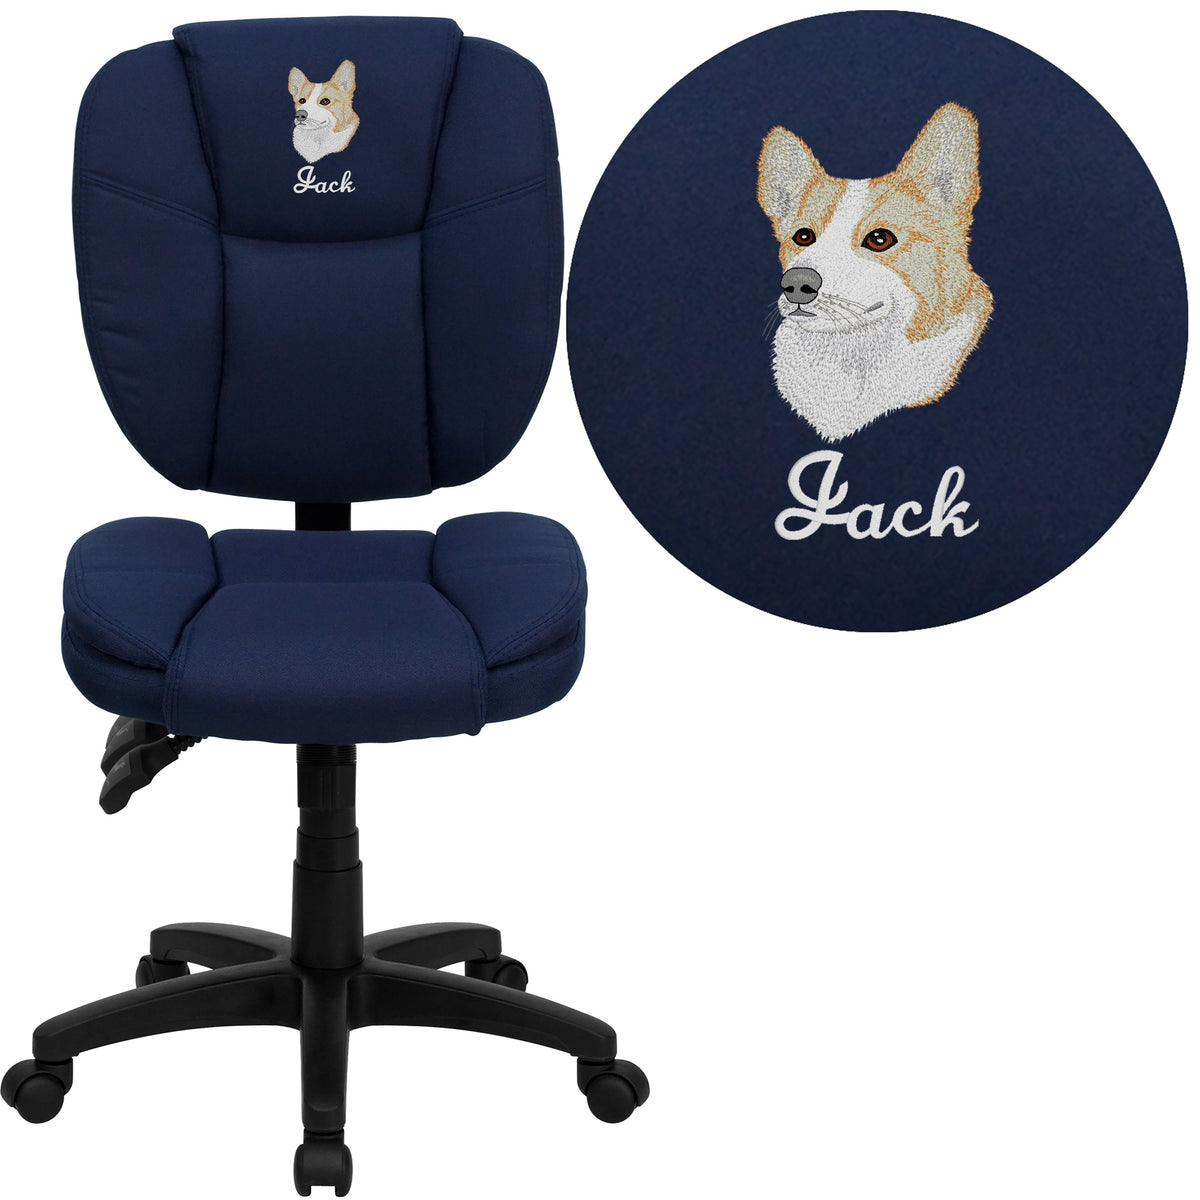 Navy Blue Fabric |#| EMB Mid-Back Navy Blue Fabric Multifunction Office Chair w/Pillow Top Cushioning